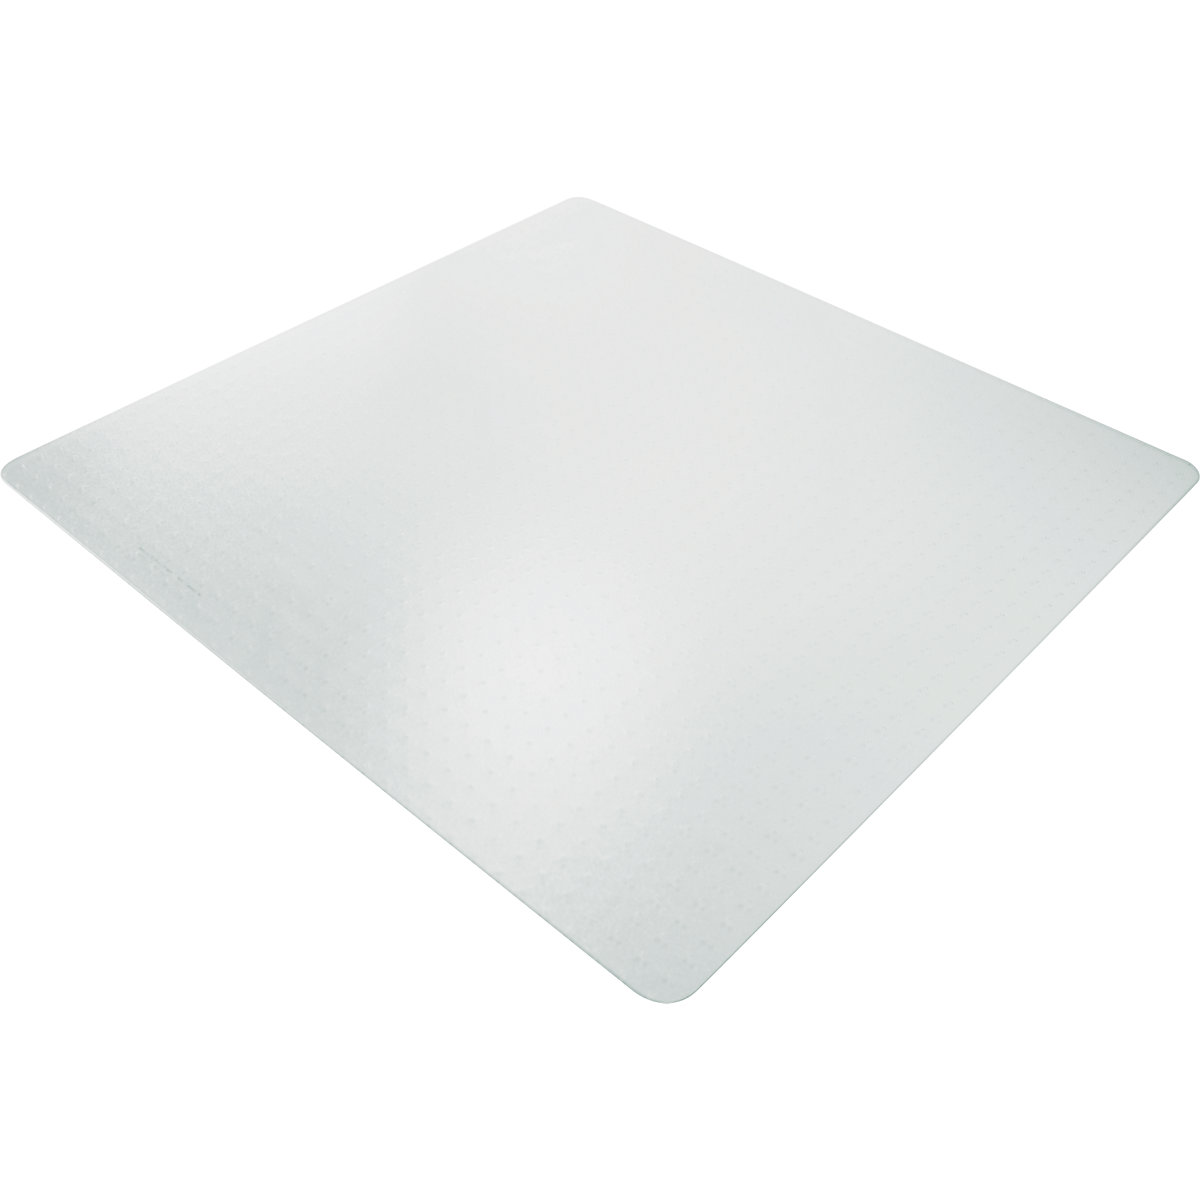 Floor protection mat DURAGRIP META, with studs for carpeted floors, WxD 1200 x 1100 mm-6